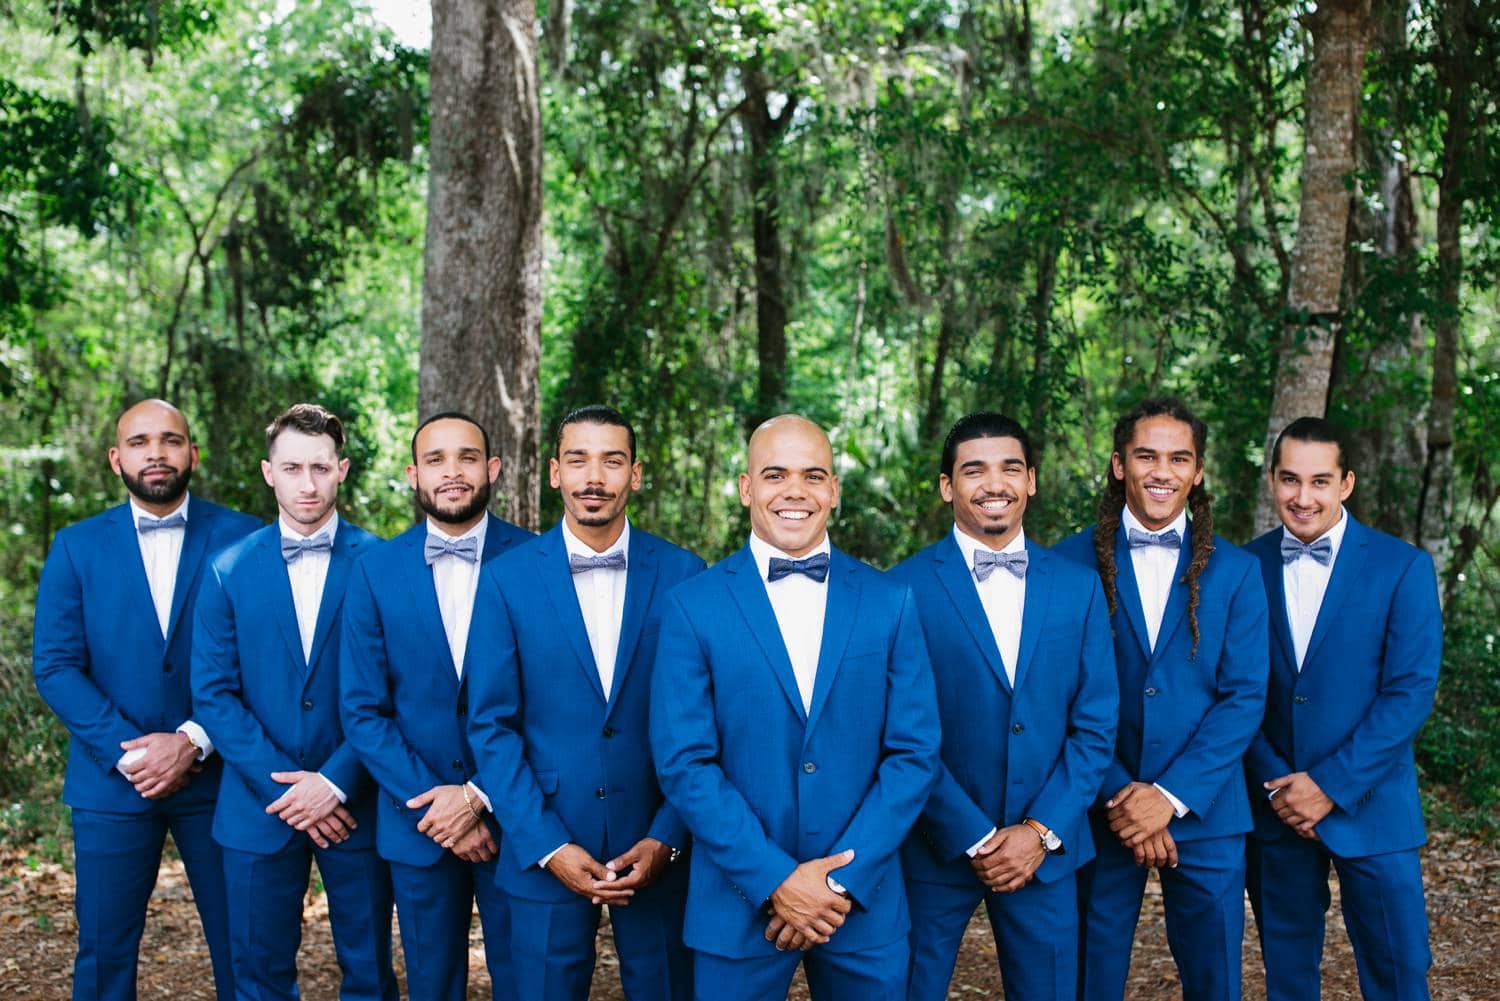 Groom and his groomsmen wearing royal blue suits. Rustic chic wedding at October Oaks Farm.